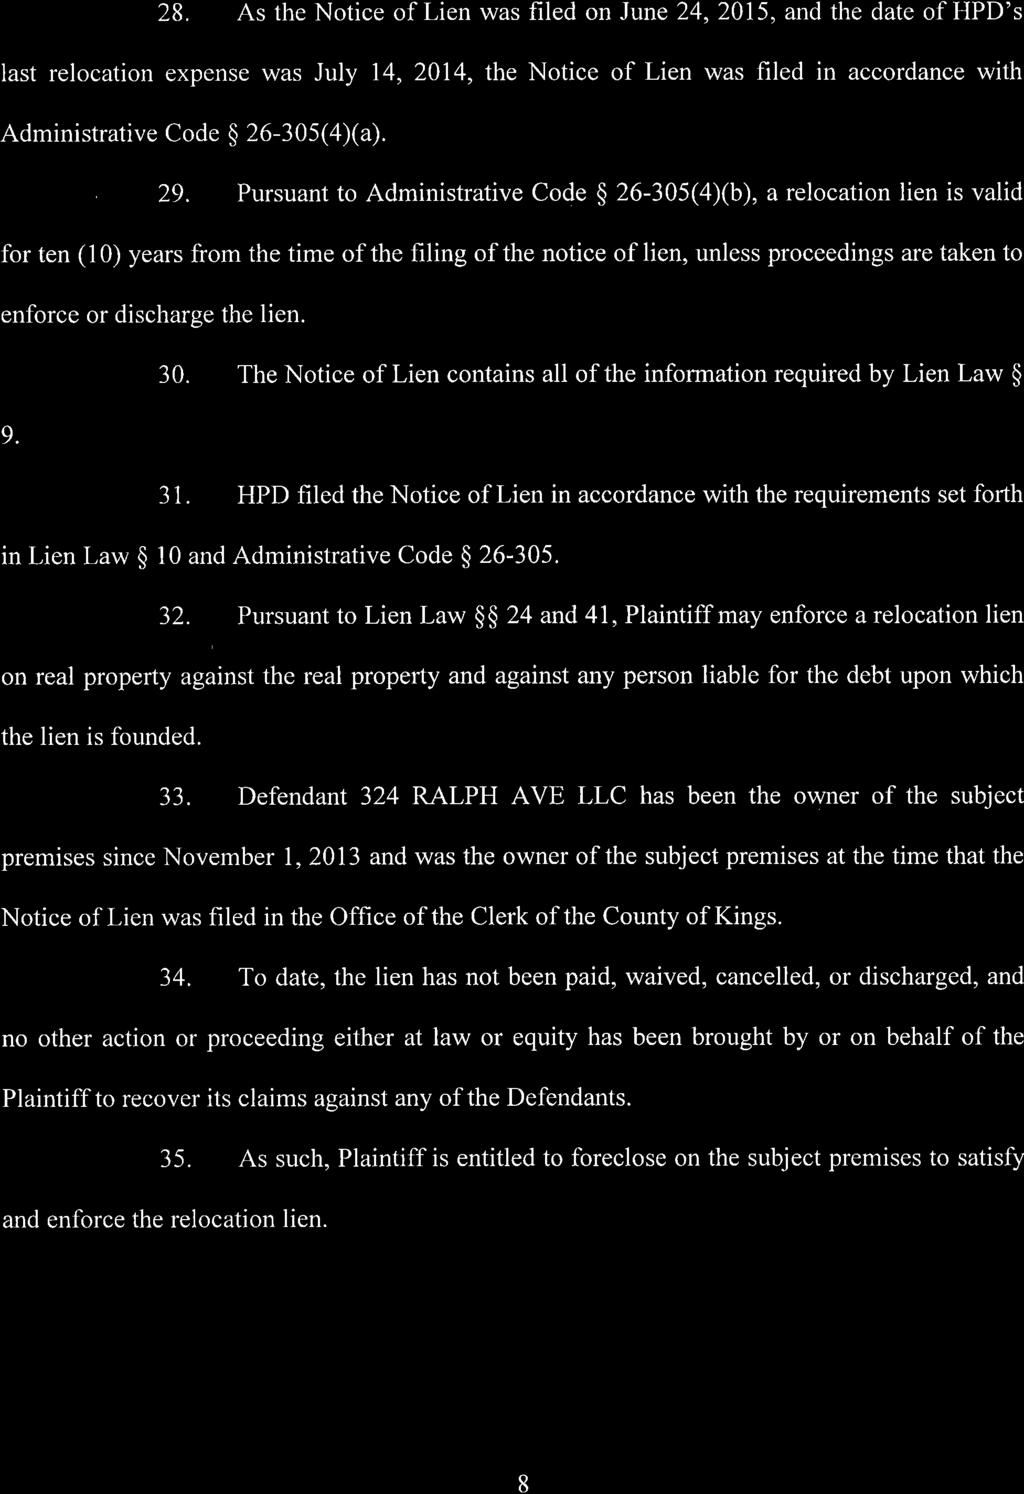 28. As the Notice of Lien was filed on June 24,2015, and the date of HPD's last relocation expense was July 14, 2074, the Notice of Lien was filed in accordance with Administrative Code $ 26-305(aXa).